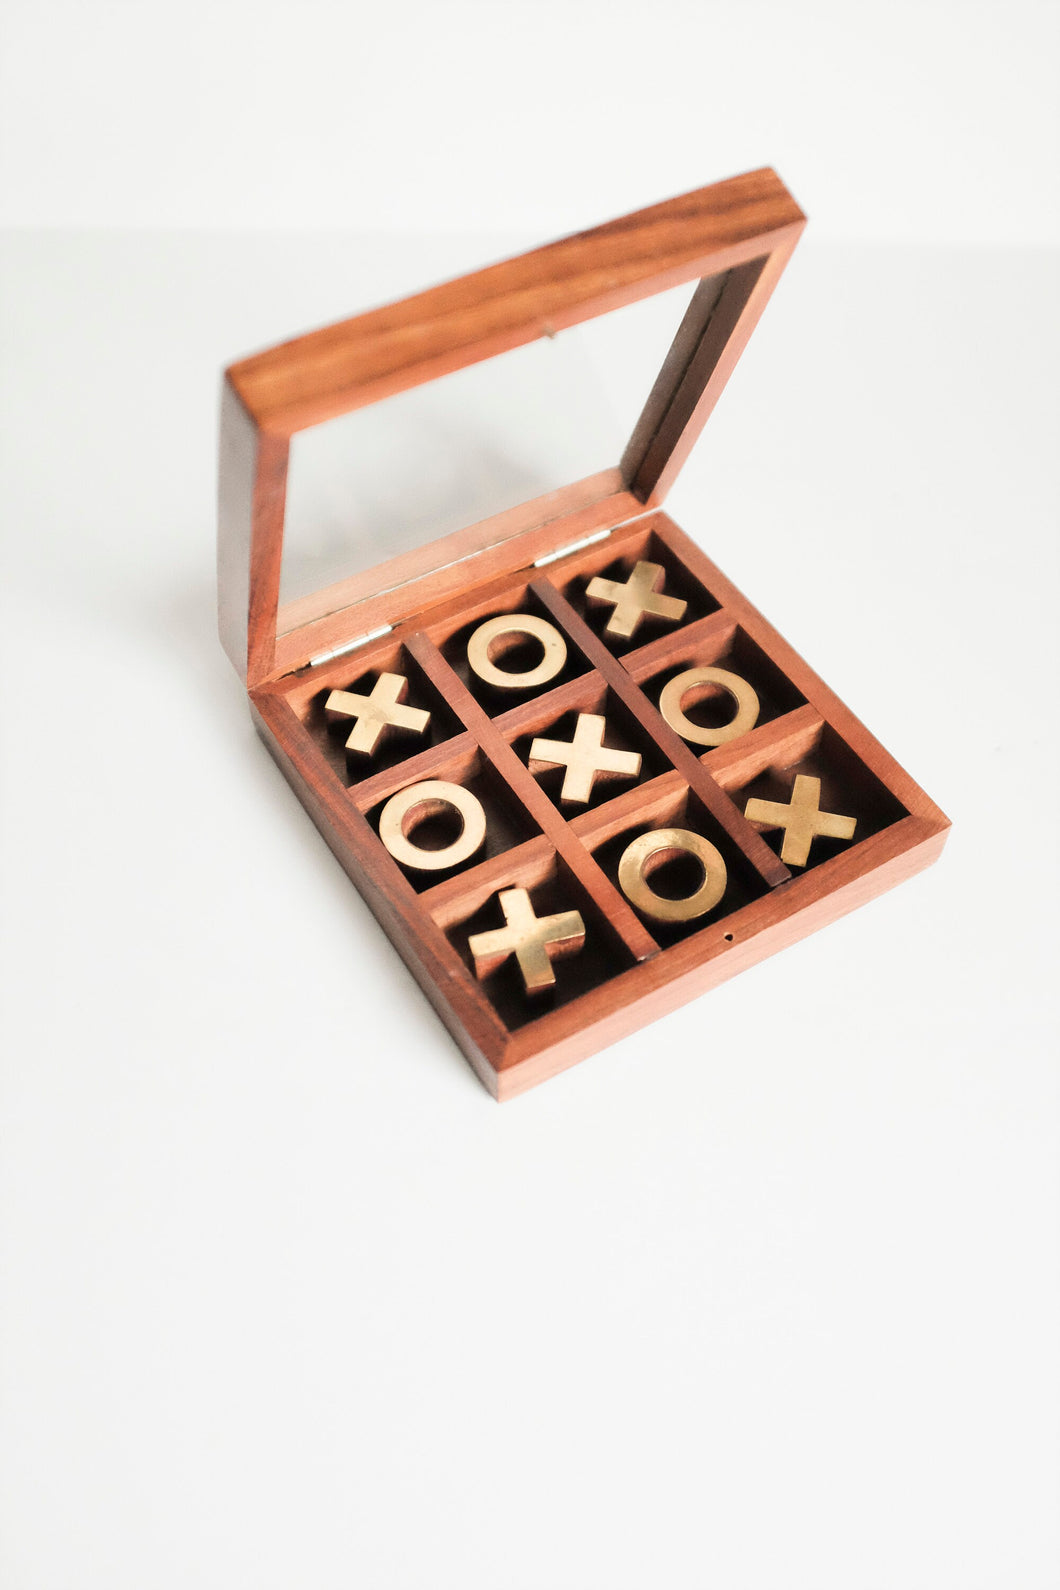 Wooden Tic Tac Toe Game